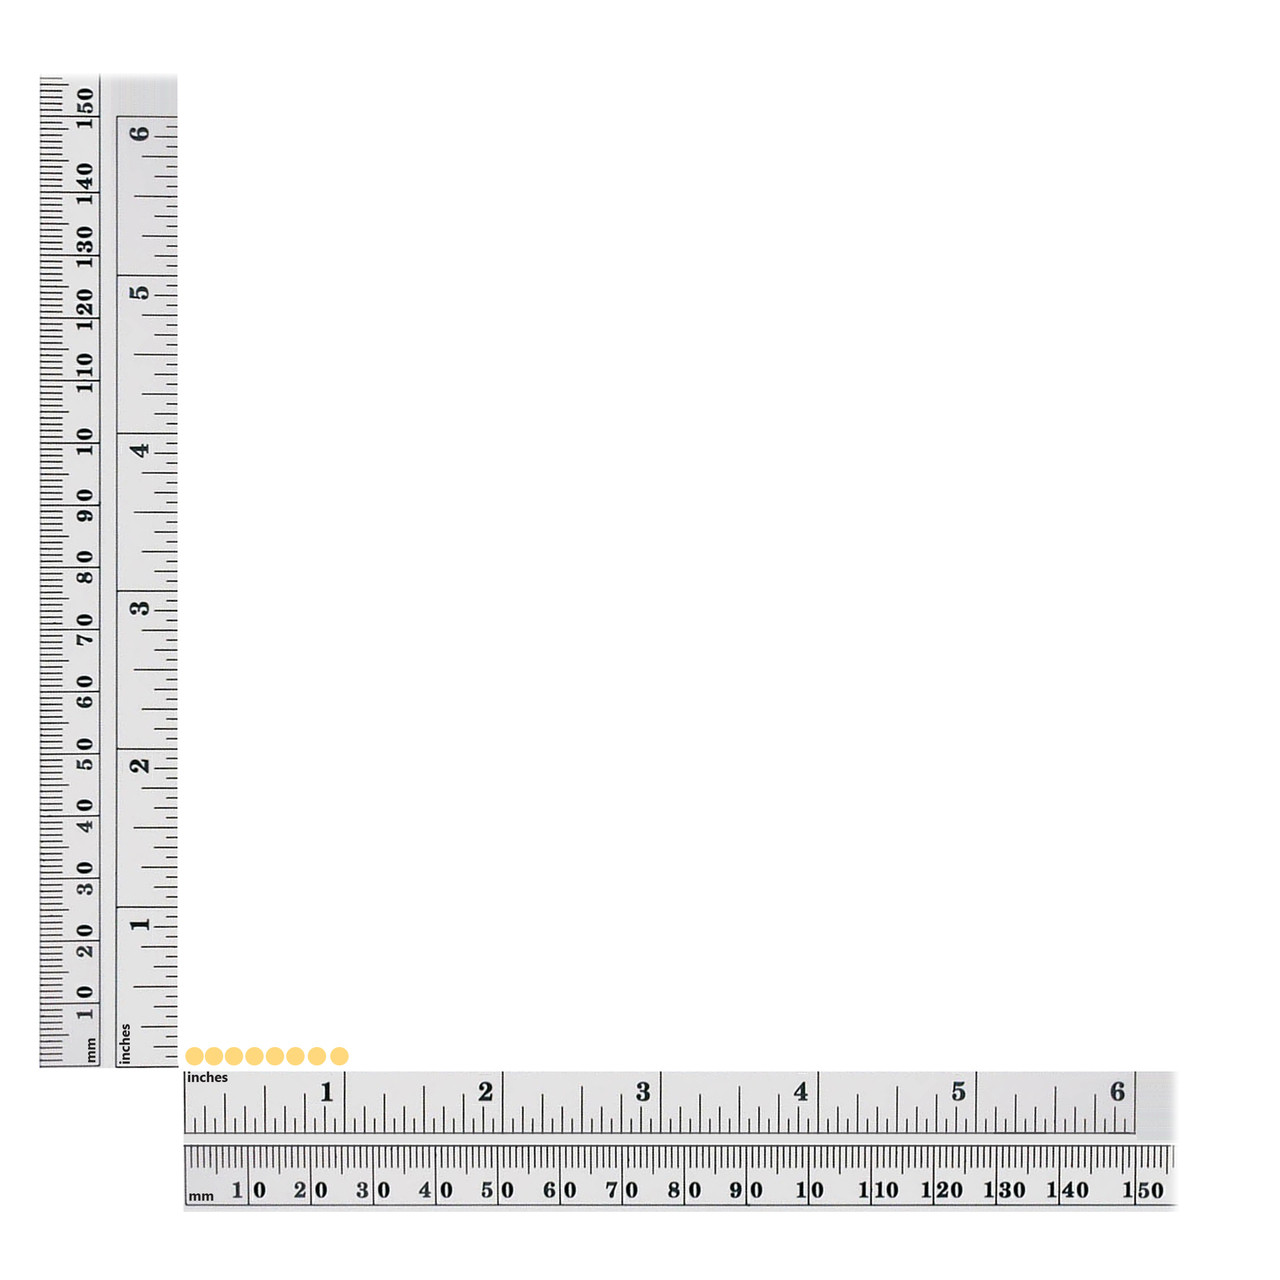 3mm sequin size chart